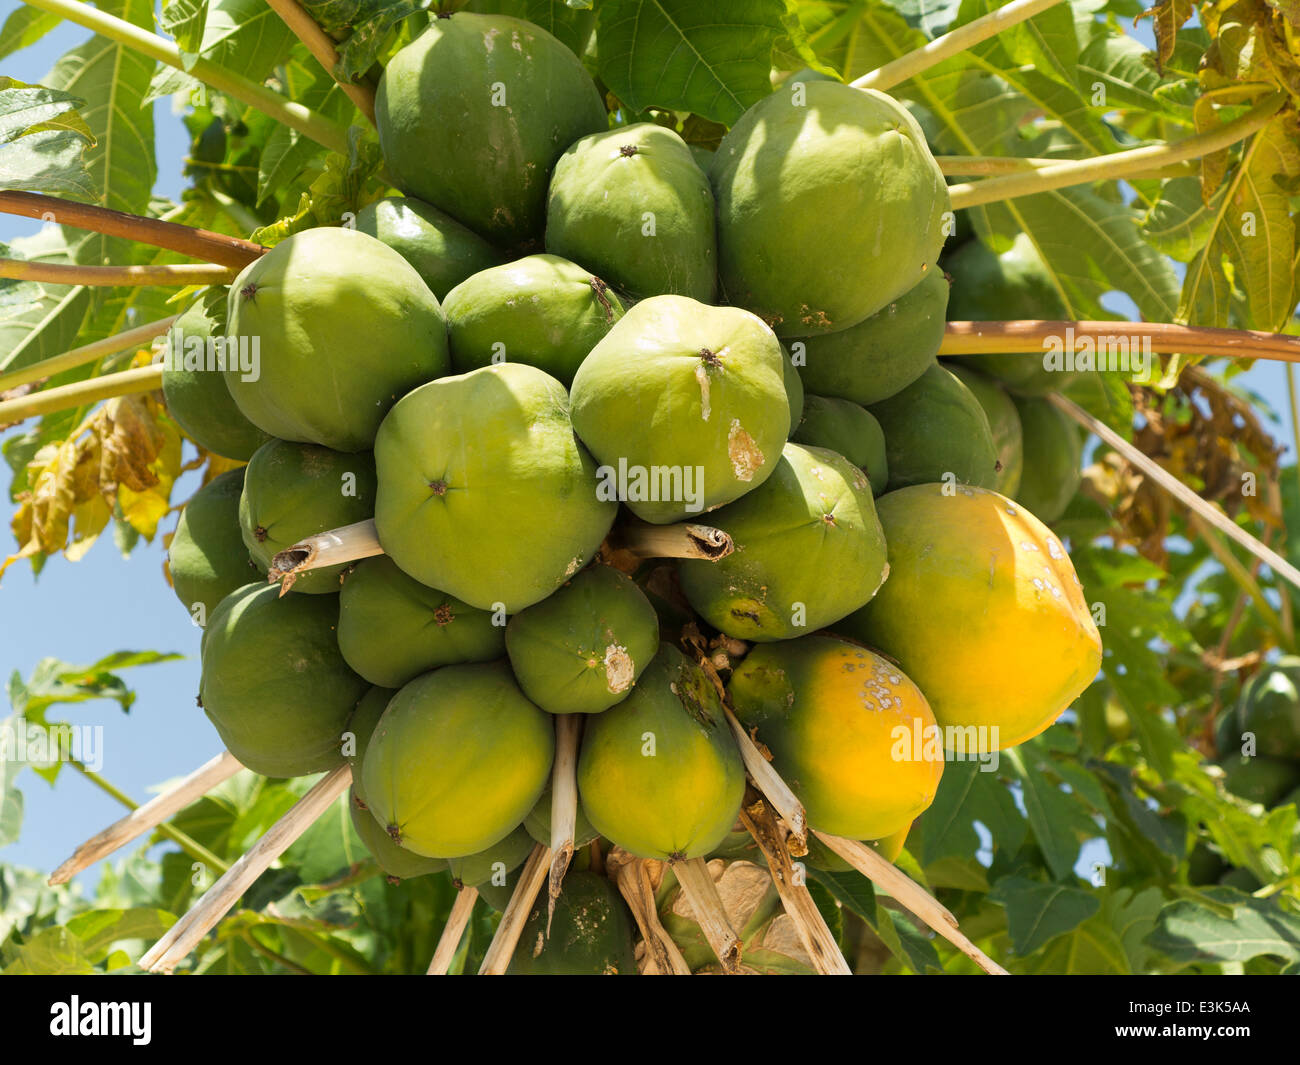 The top section of a papaya tree against a blue sky showing leaves and fruit some fruit with slight rot and blemishes Stock Photo